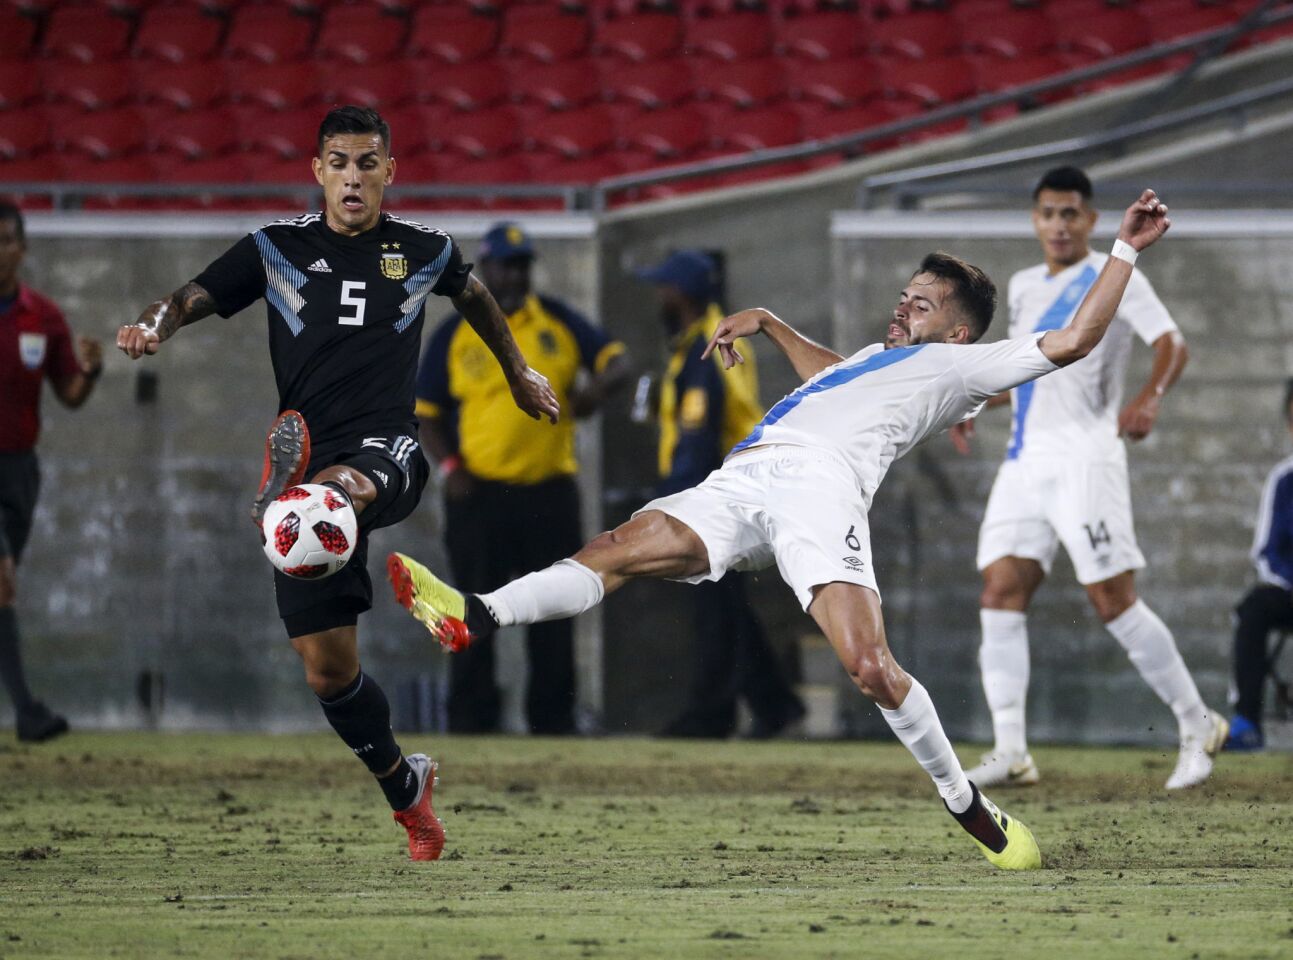 Argentina midfielder Leandro Paredes, left, and Guatemala midfielder Rodrigo Saravia Samayoa compete for the ball during the first half of an international friendly soccer match in Los Angeles, Friday, Sept. 7, 2018. (AP Photo/Ringo H.W. Chiu)